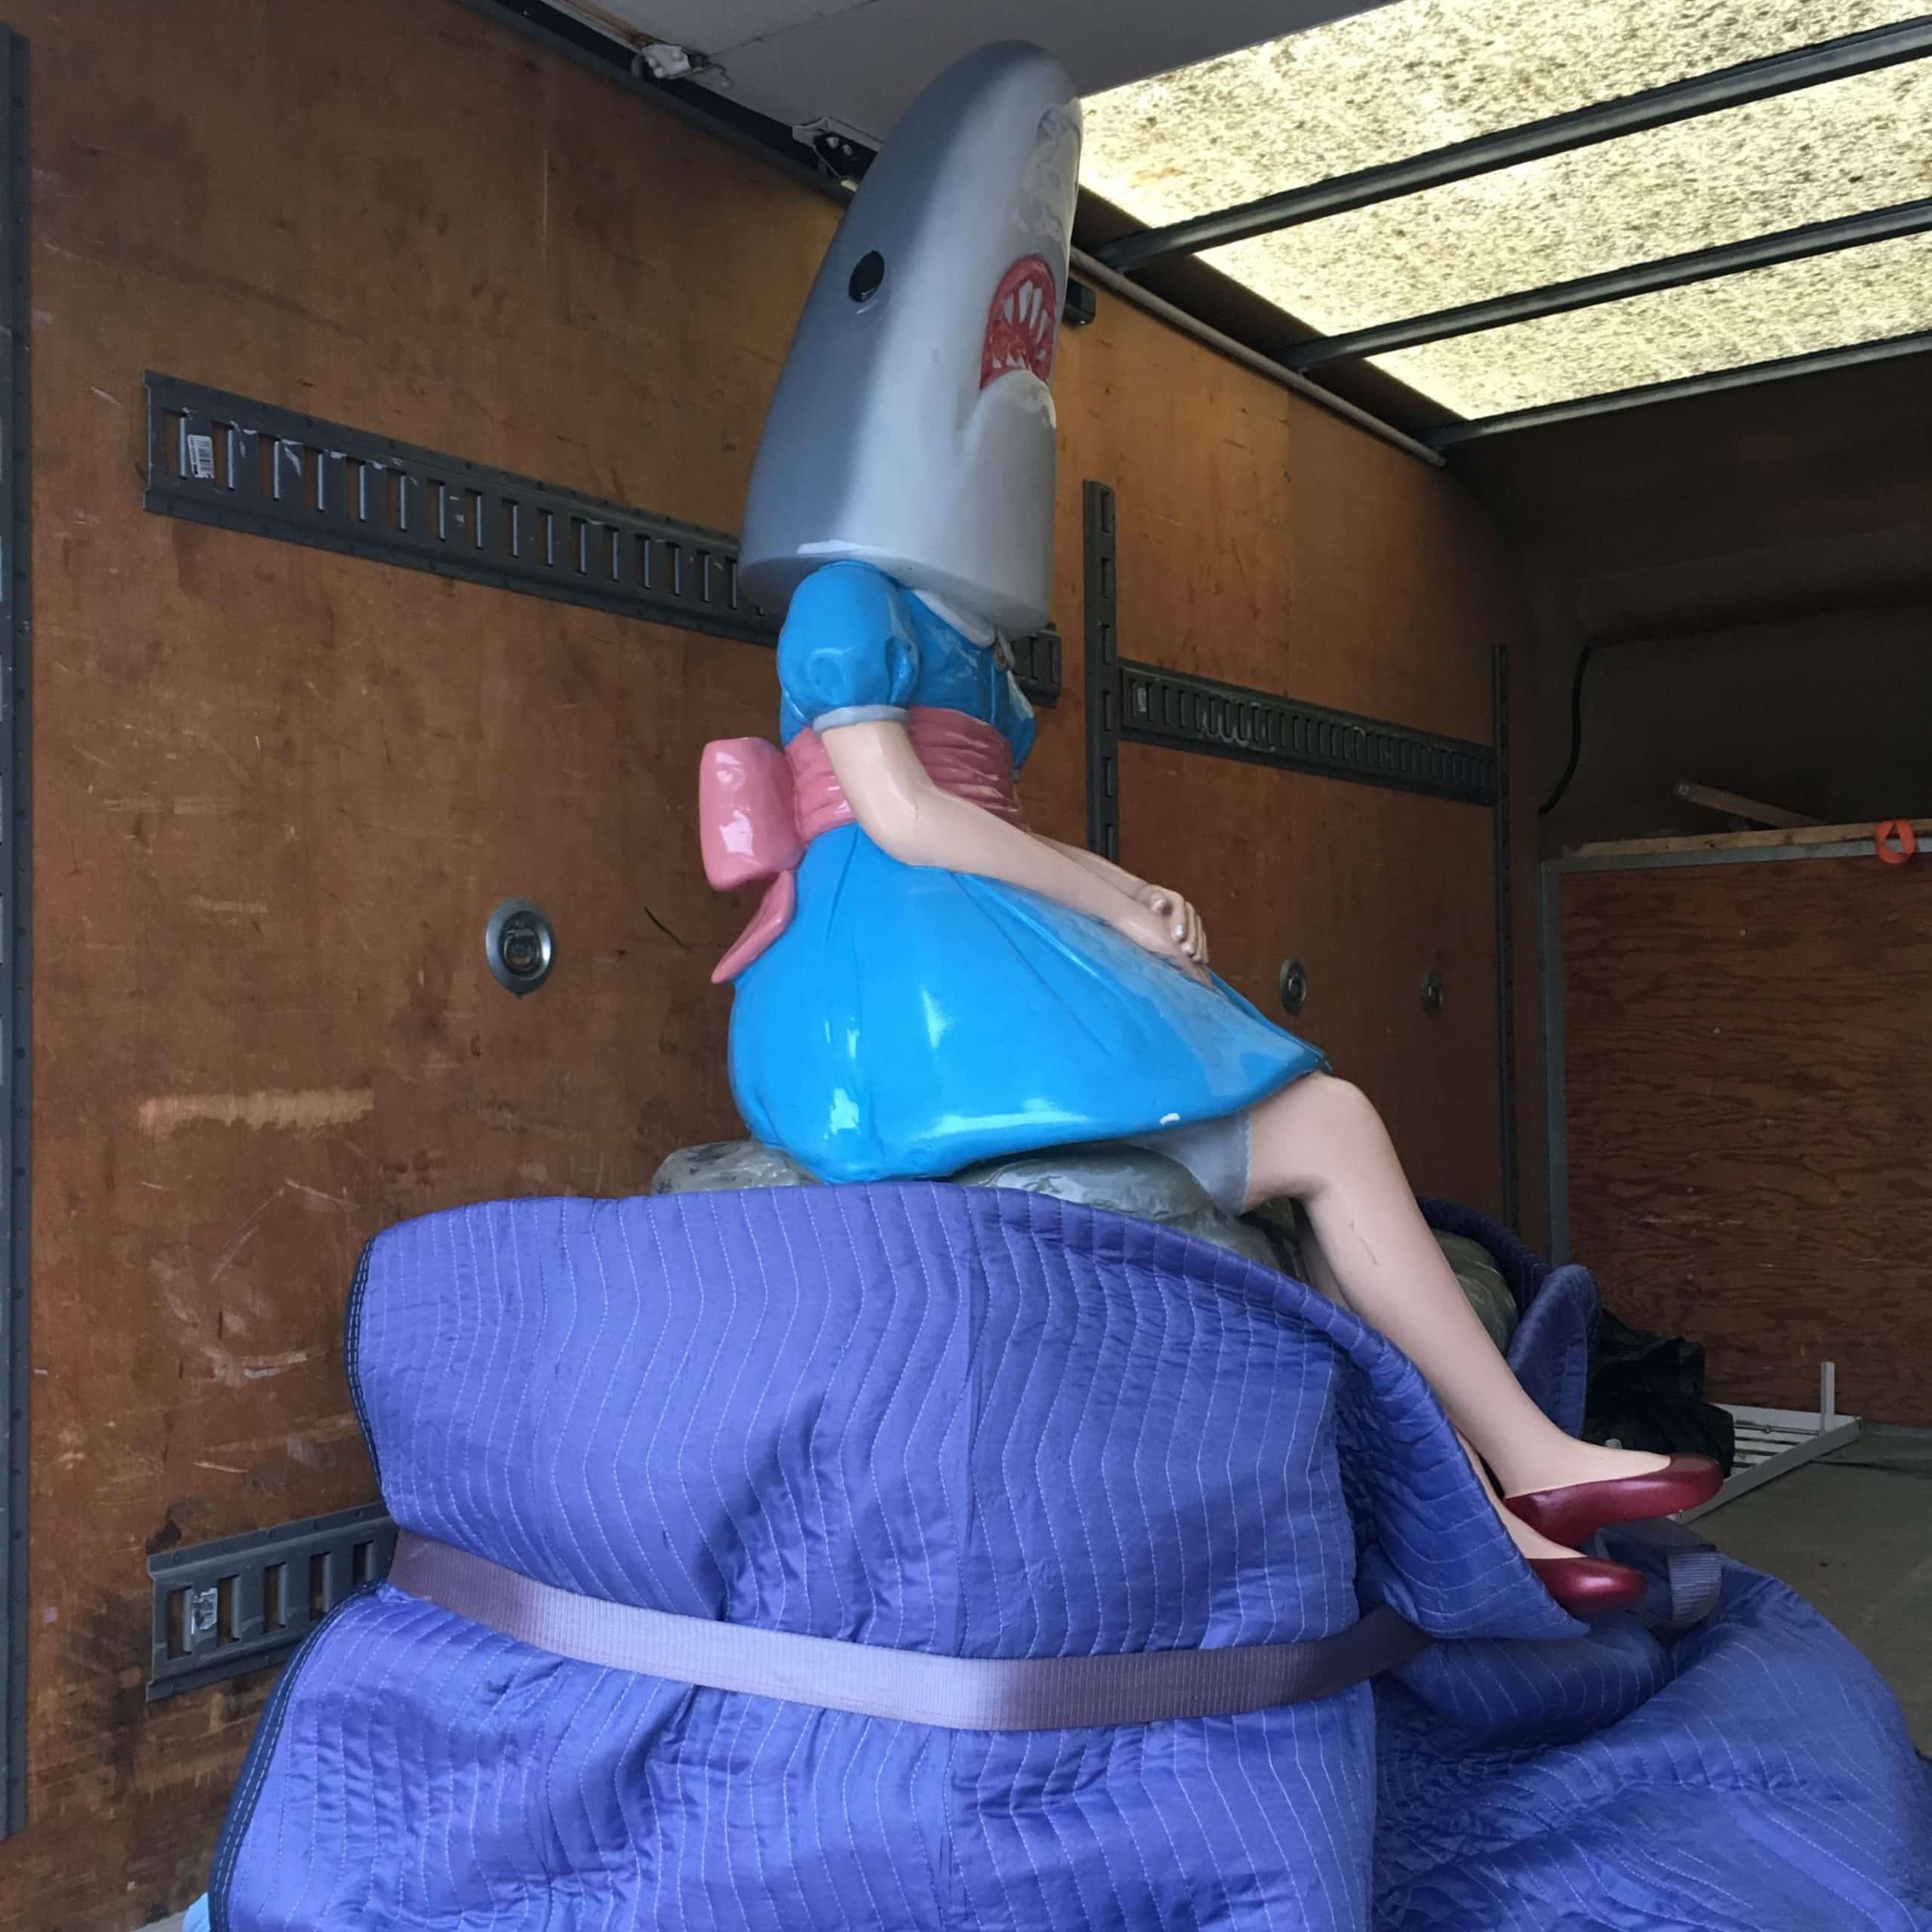 Shark Girl is missing from Canalside. No worries, she’s just getting a spring clean-up!